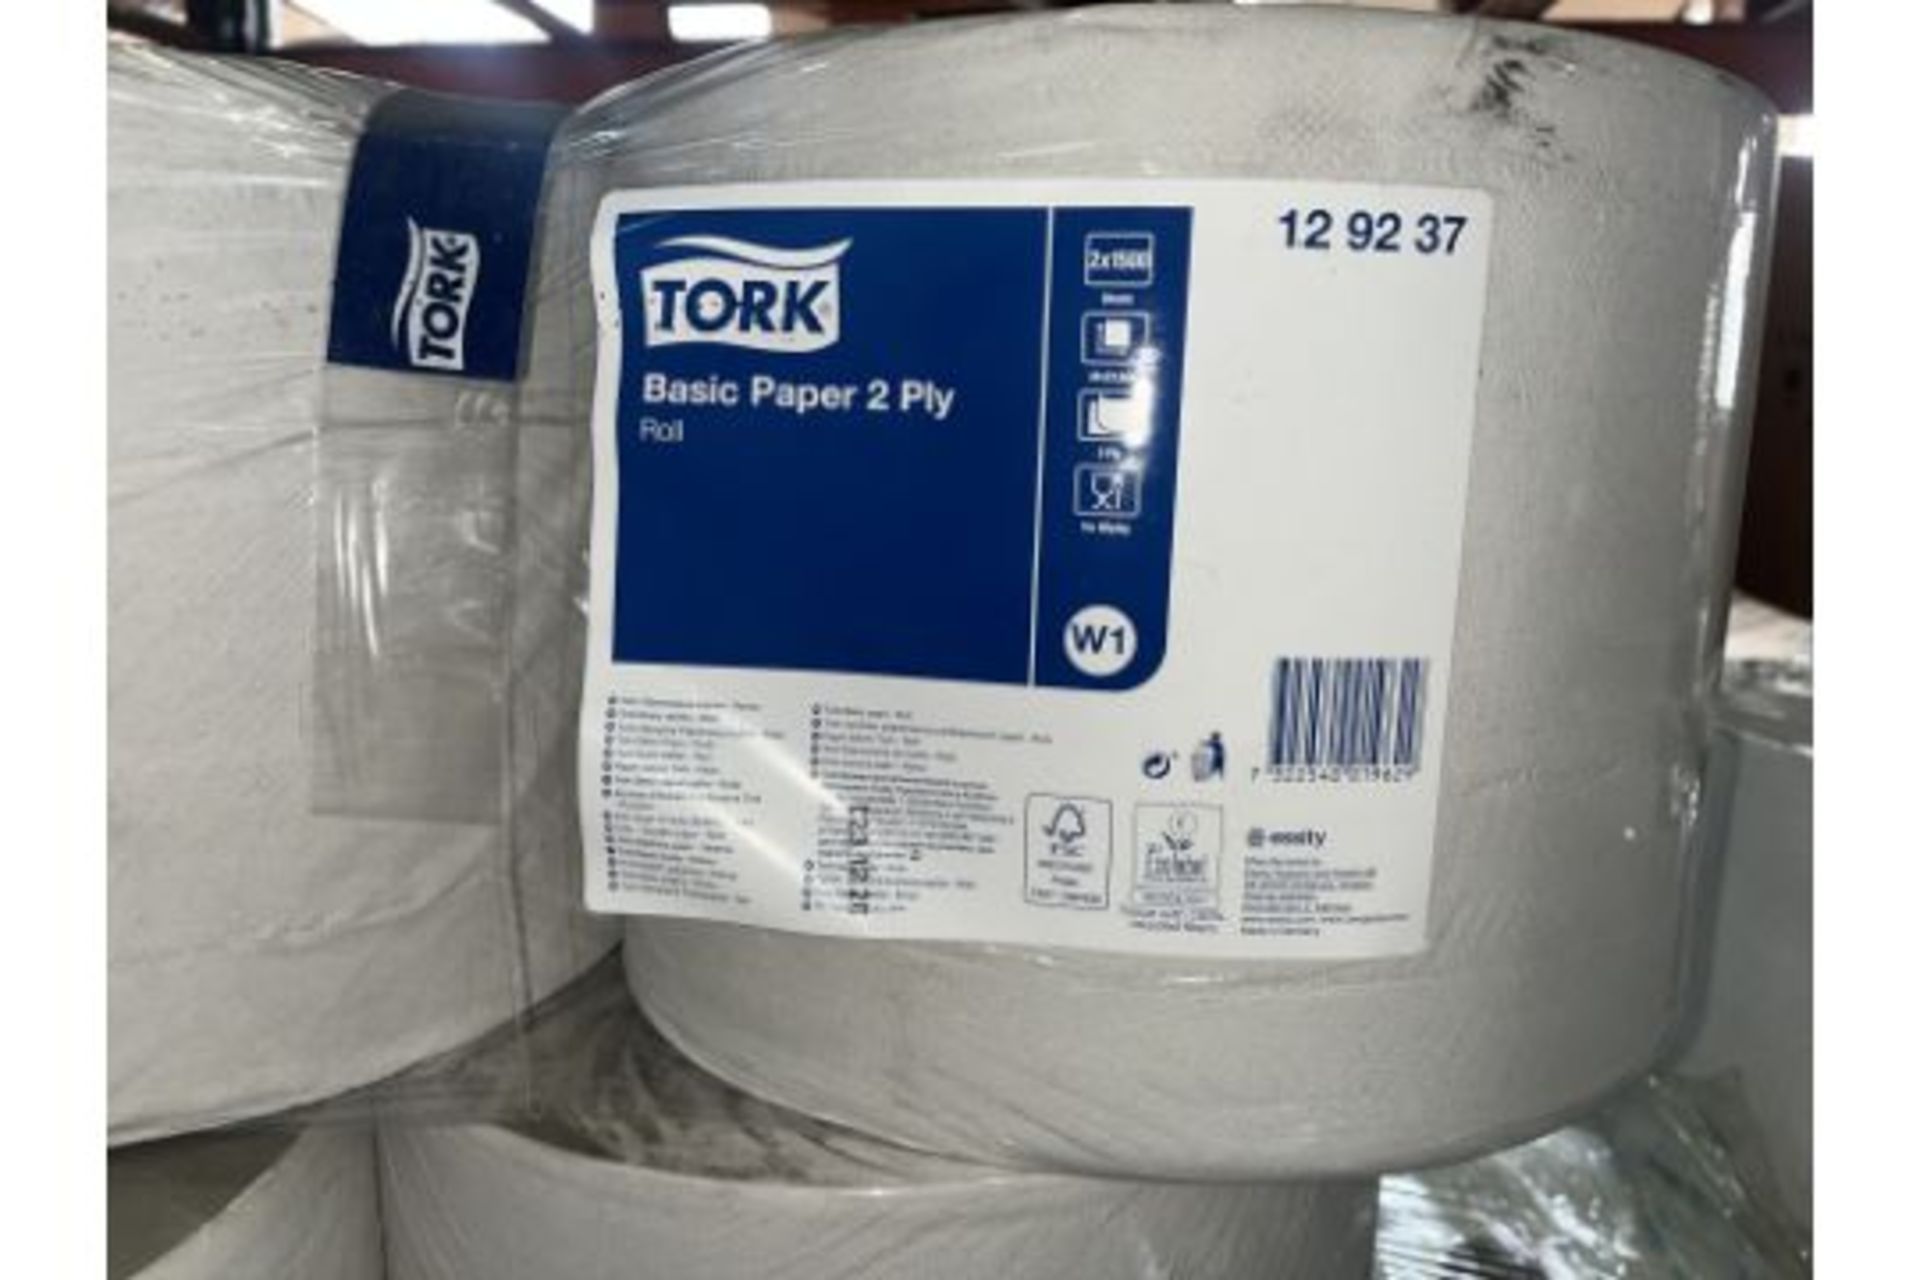 5 X BRAND NEW PACKS OF 2 TORK 129237 PAPER ROLLS 2PLY 1500 SHEETS PER ROLL RRP £55 EACH R17C